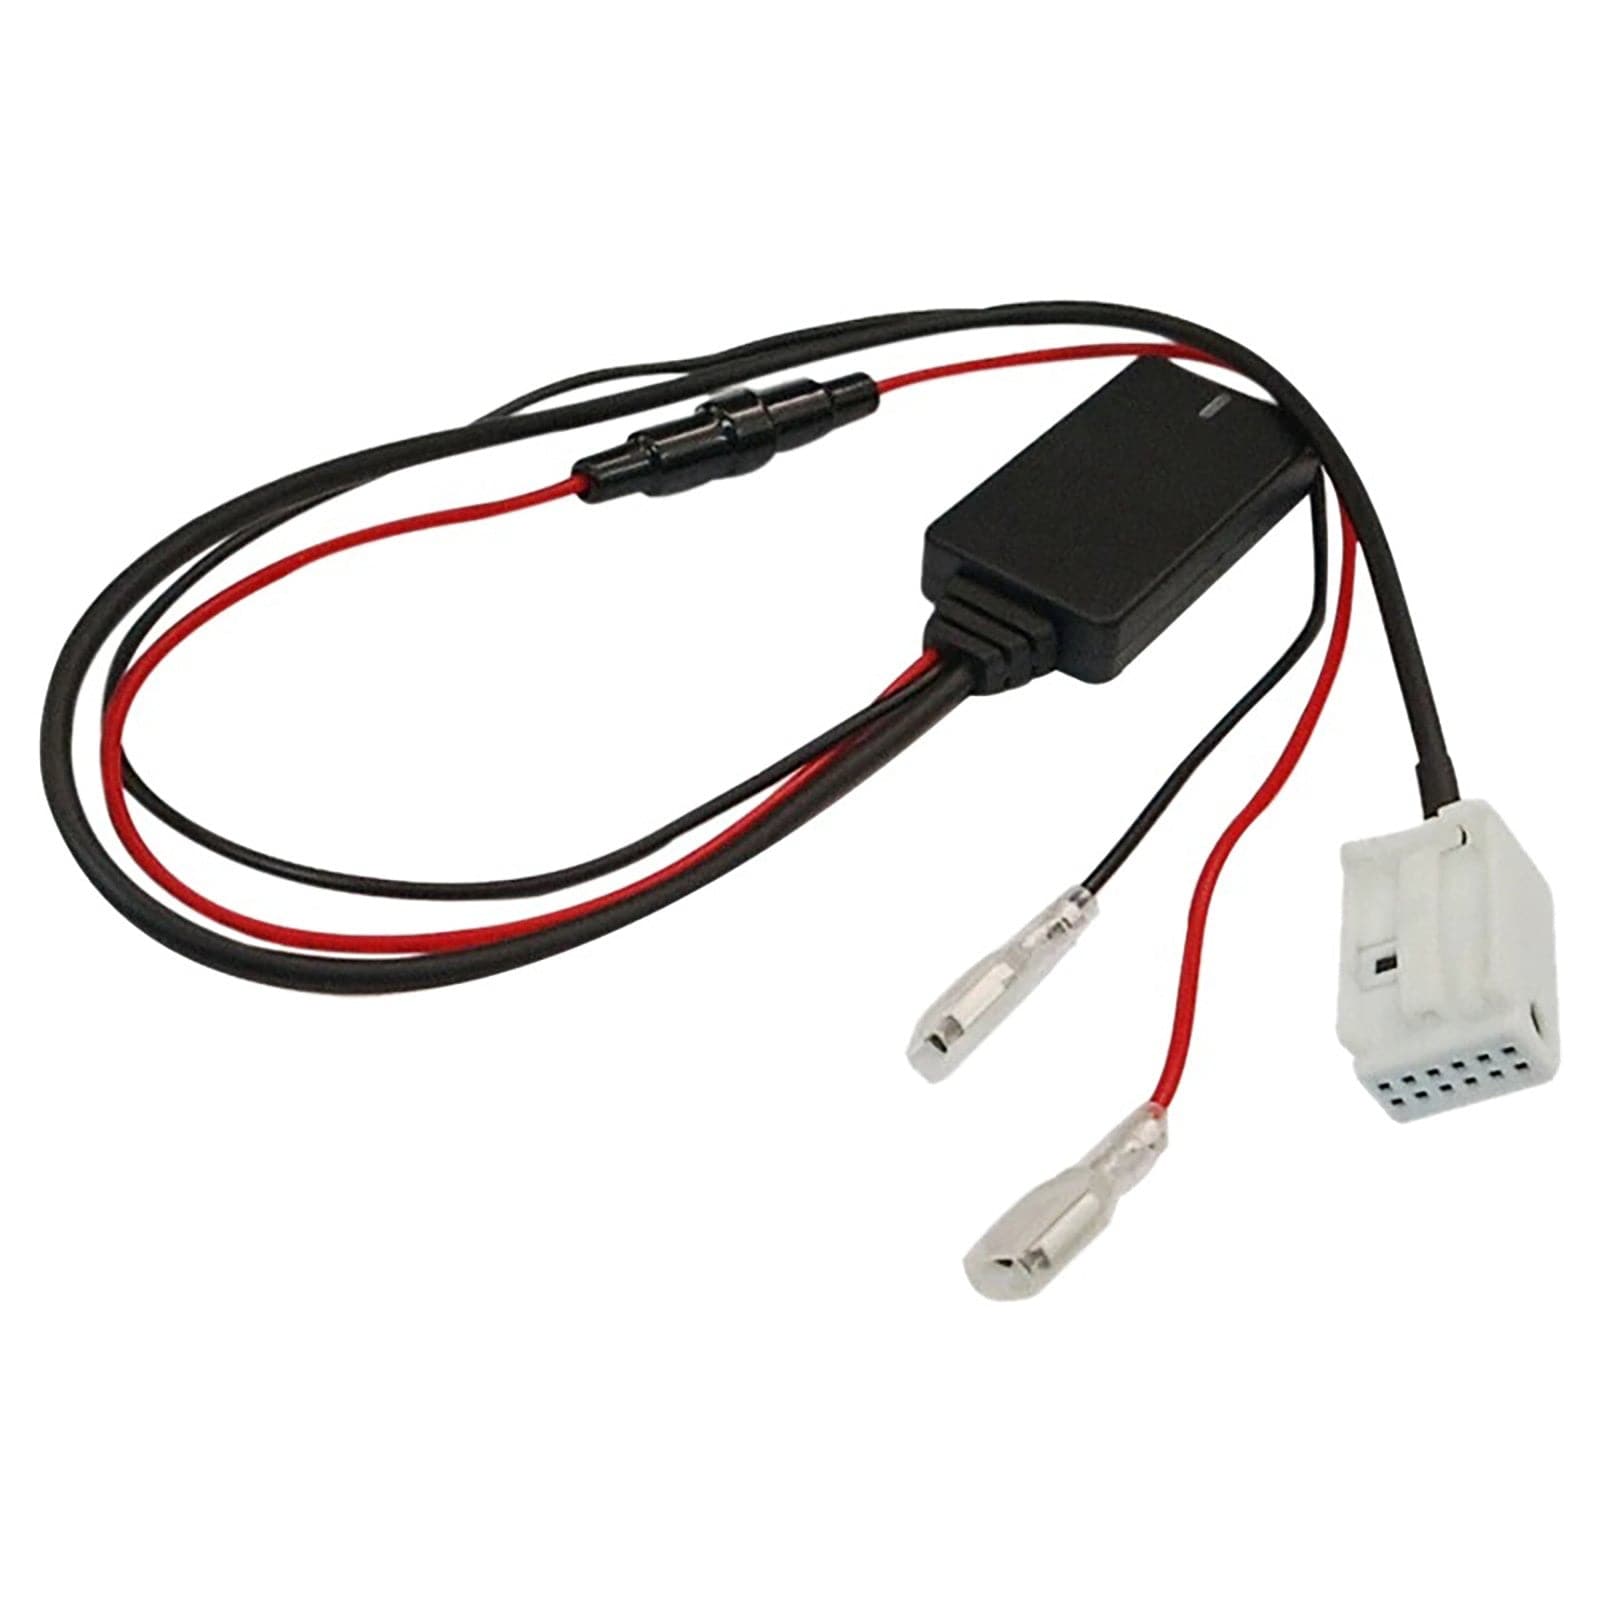 BLUETOOTH MODULE for VE S1